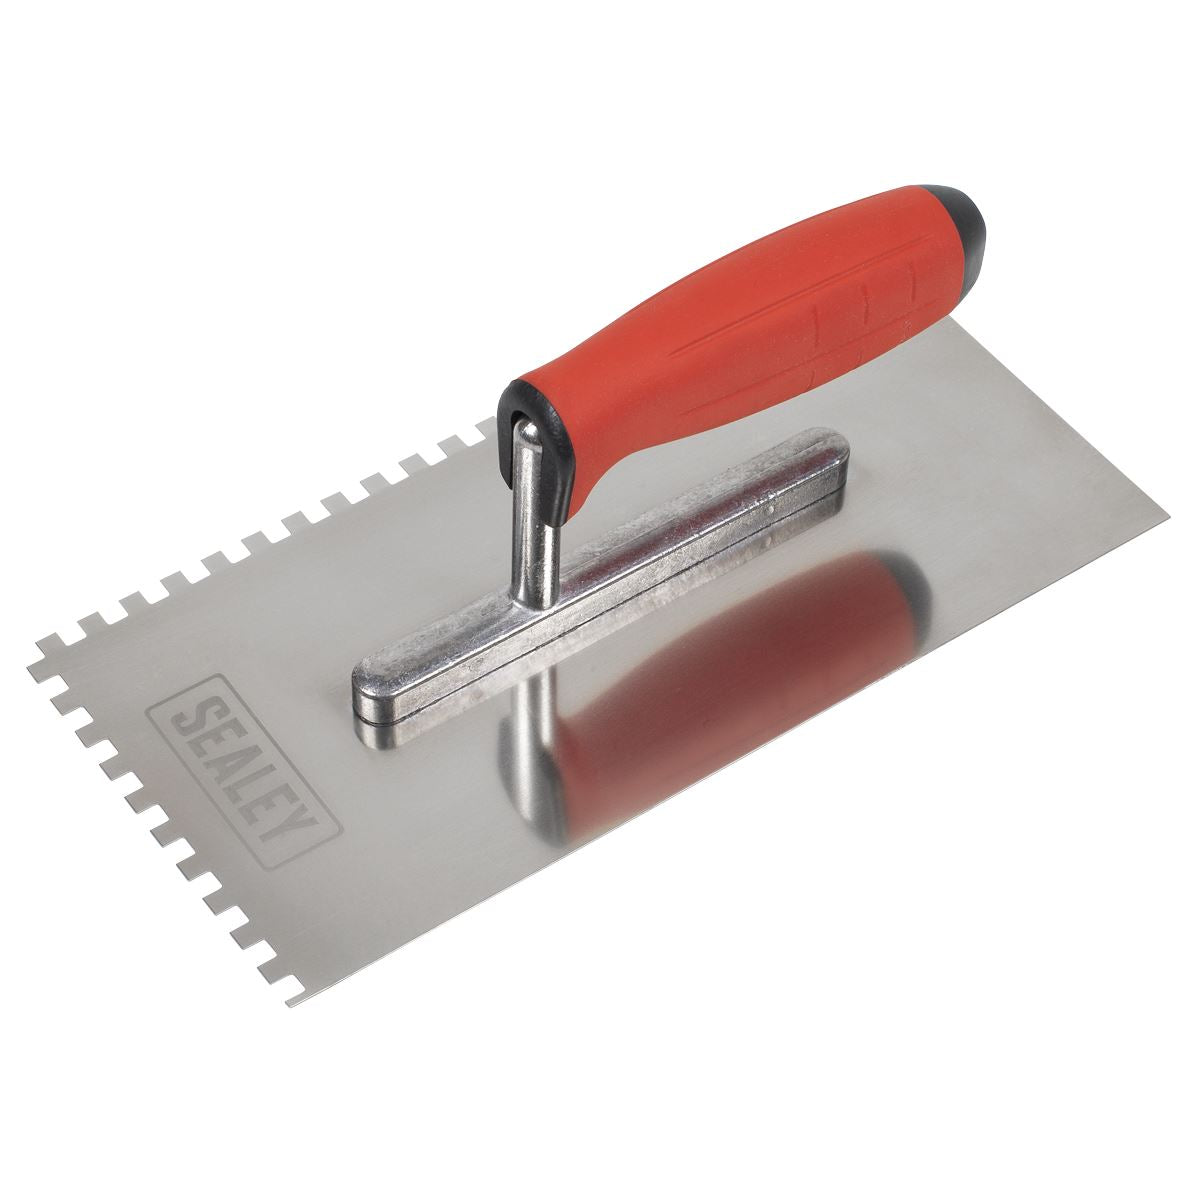 Sealey Stainless Steel 270mm Notched Trowel - Rubber Handle - 6mm